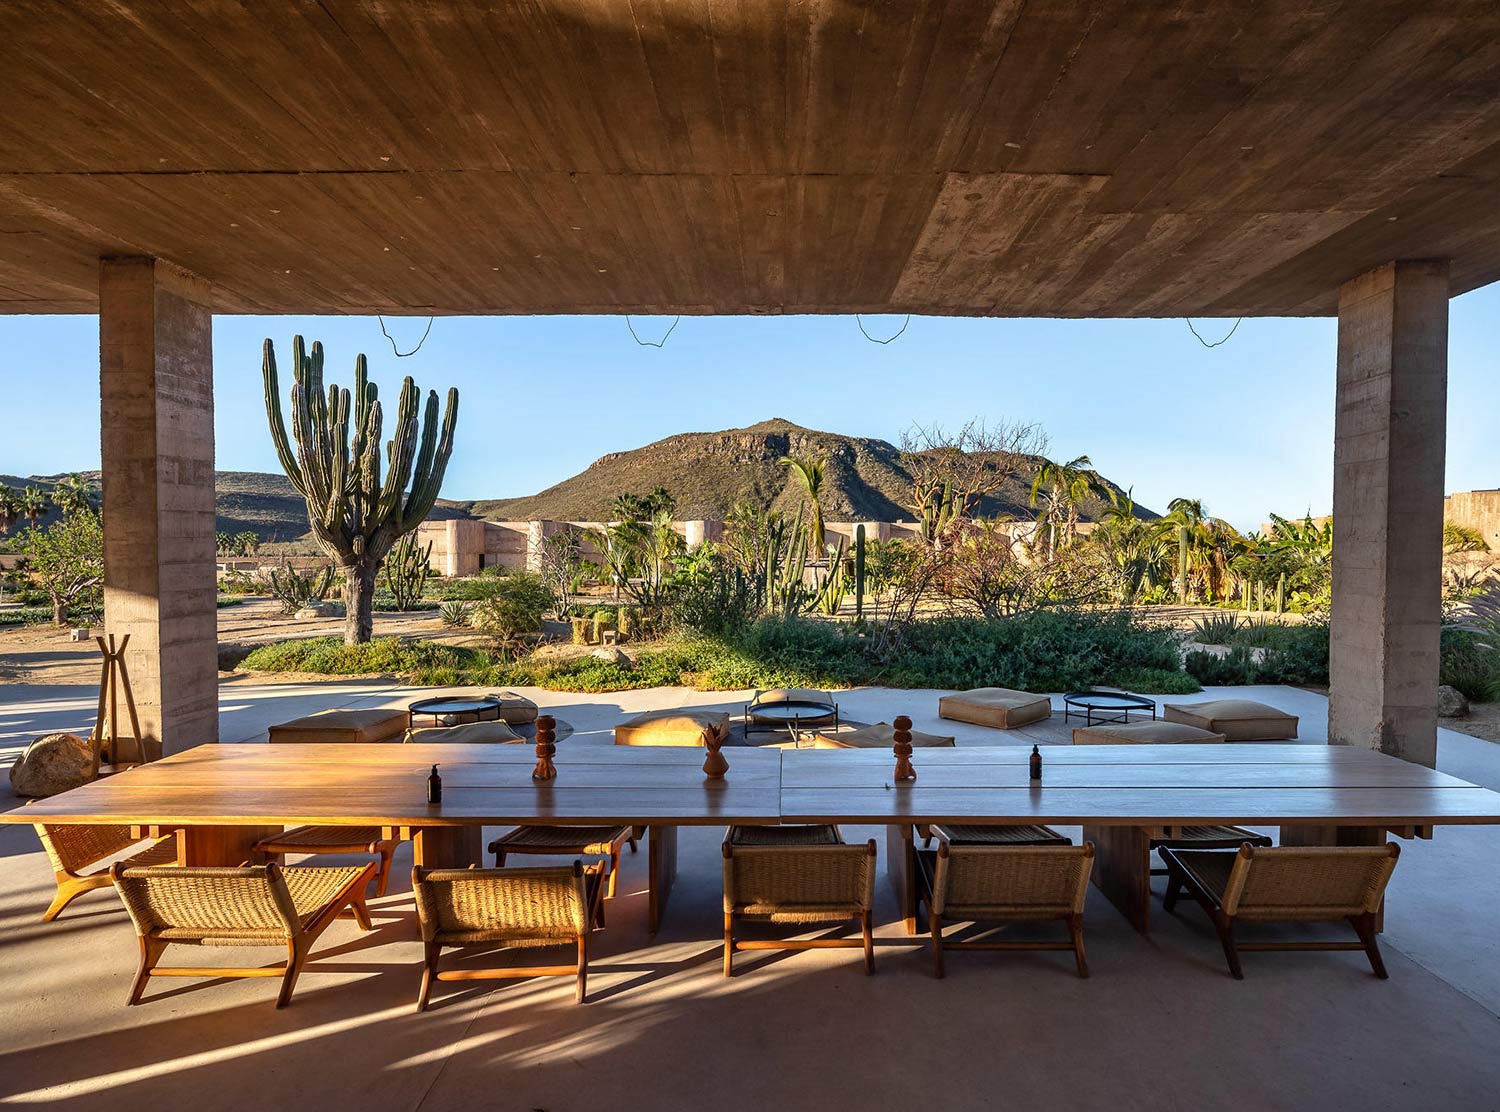 Paradero stands in the desert with a breathtaking view of the Sierra Laguna mountains